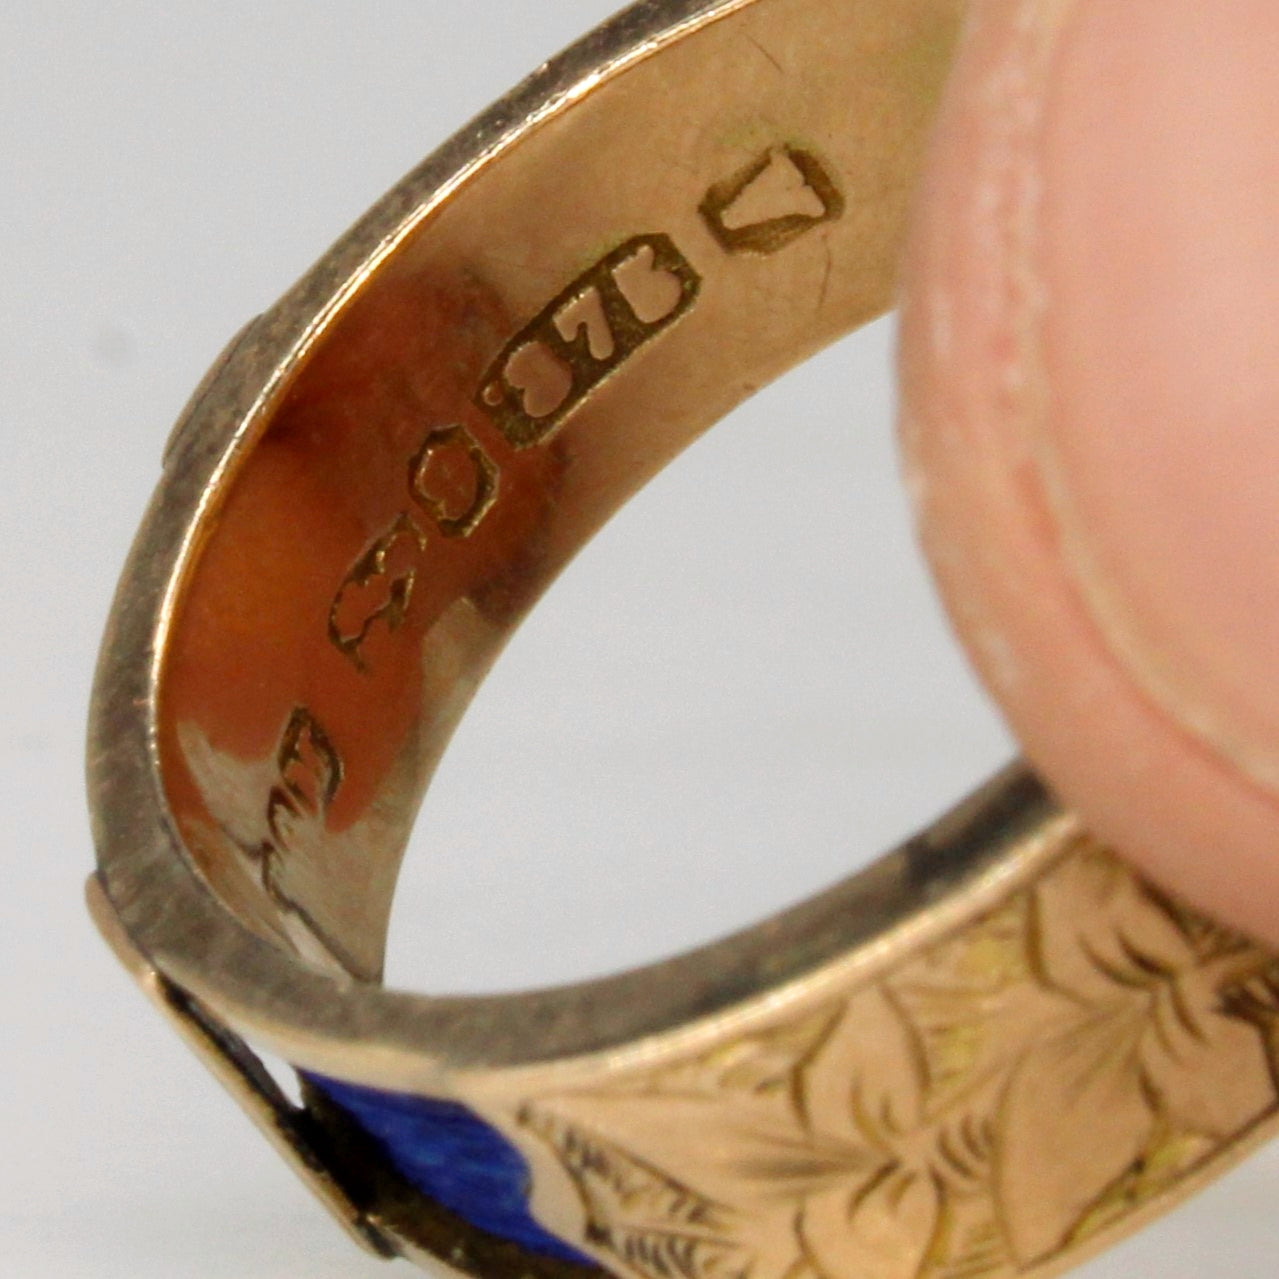 Antique Hallmarked 9k Heart Ring with Hand Carving and Blue Ribbon | SZ 5.75 |